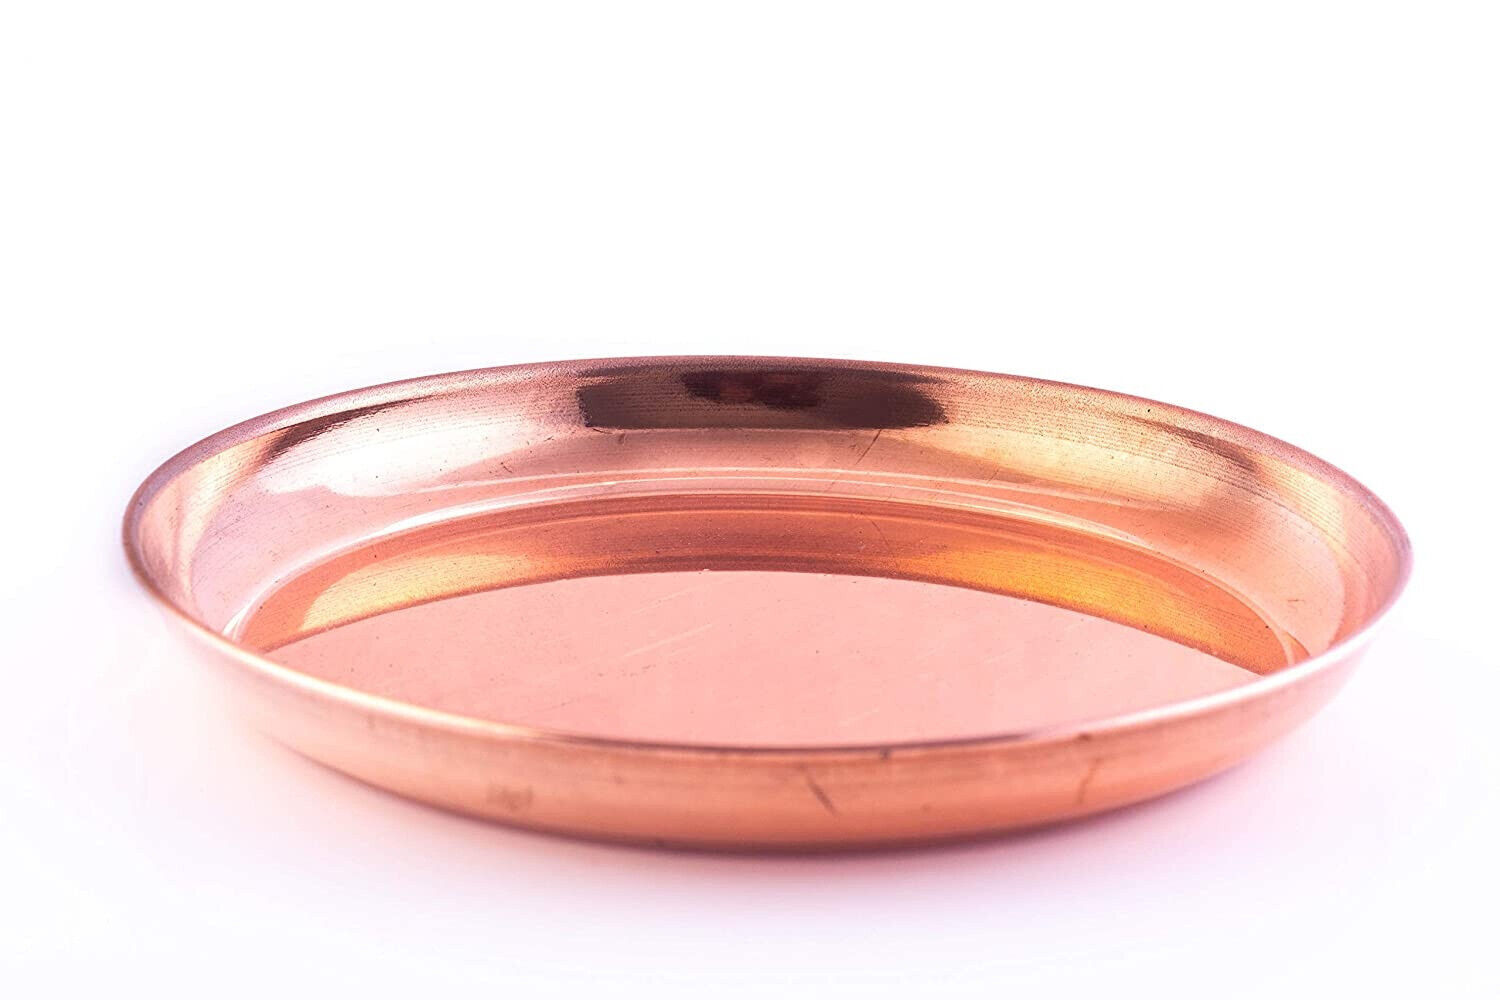 Indian Traditional Pure Copper Simple Plate 7 inch For Dinner Serving